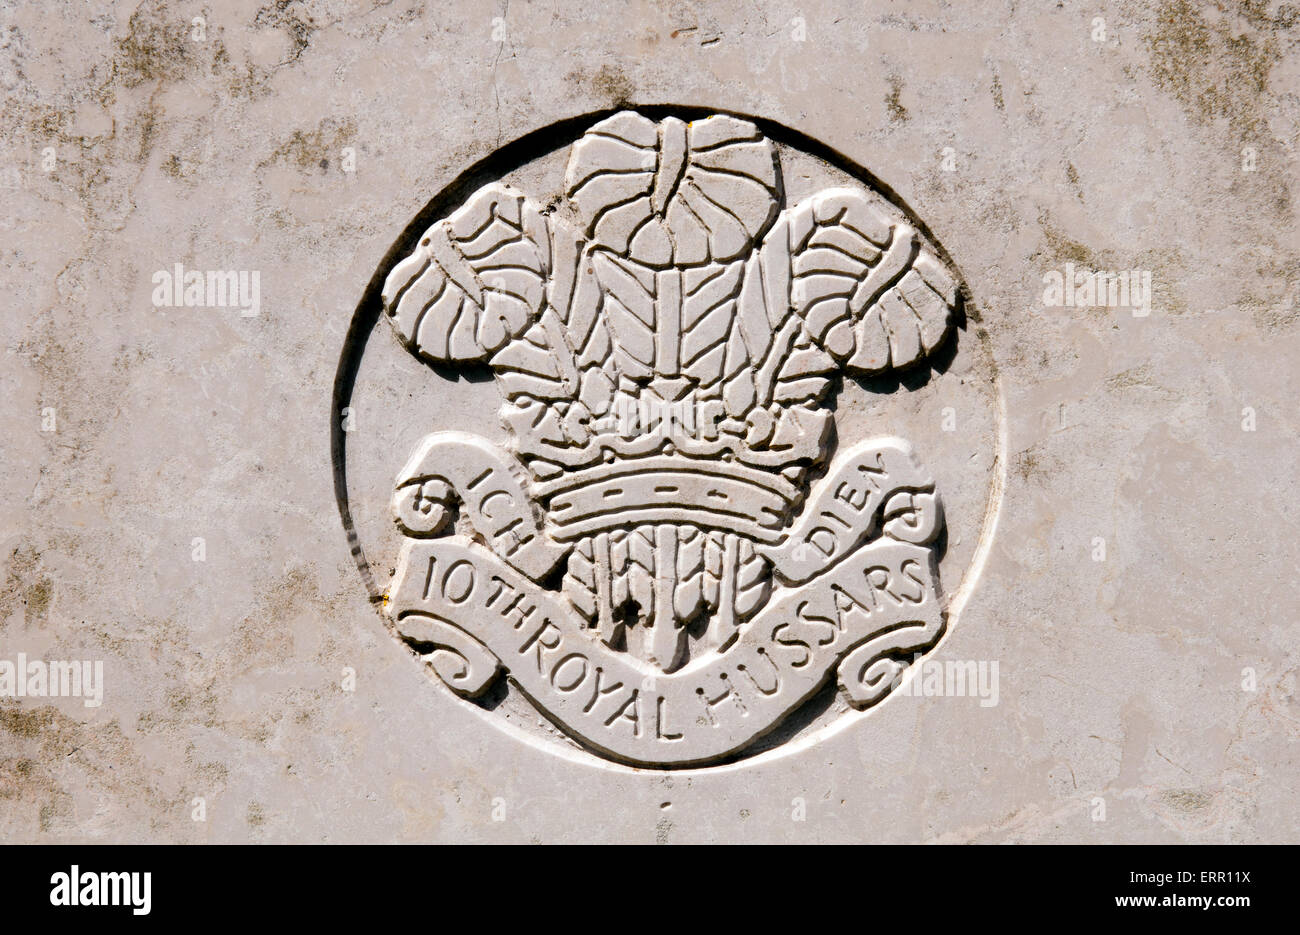 10th Royal Hussars badge on a war grave Stock Photo